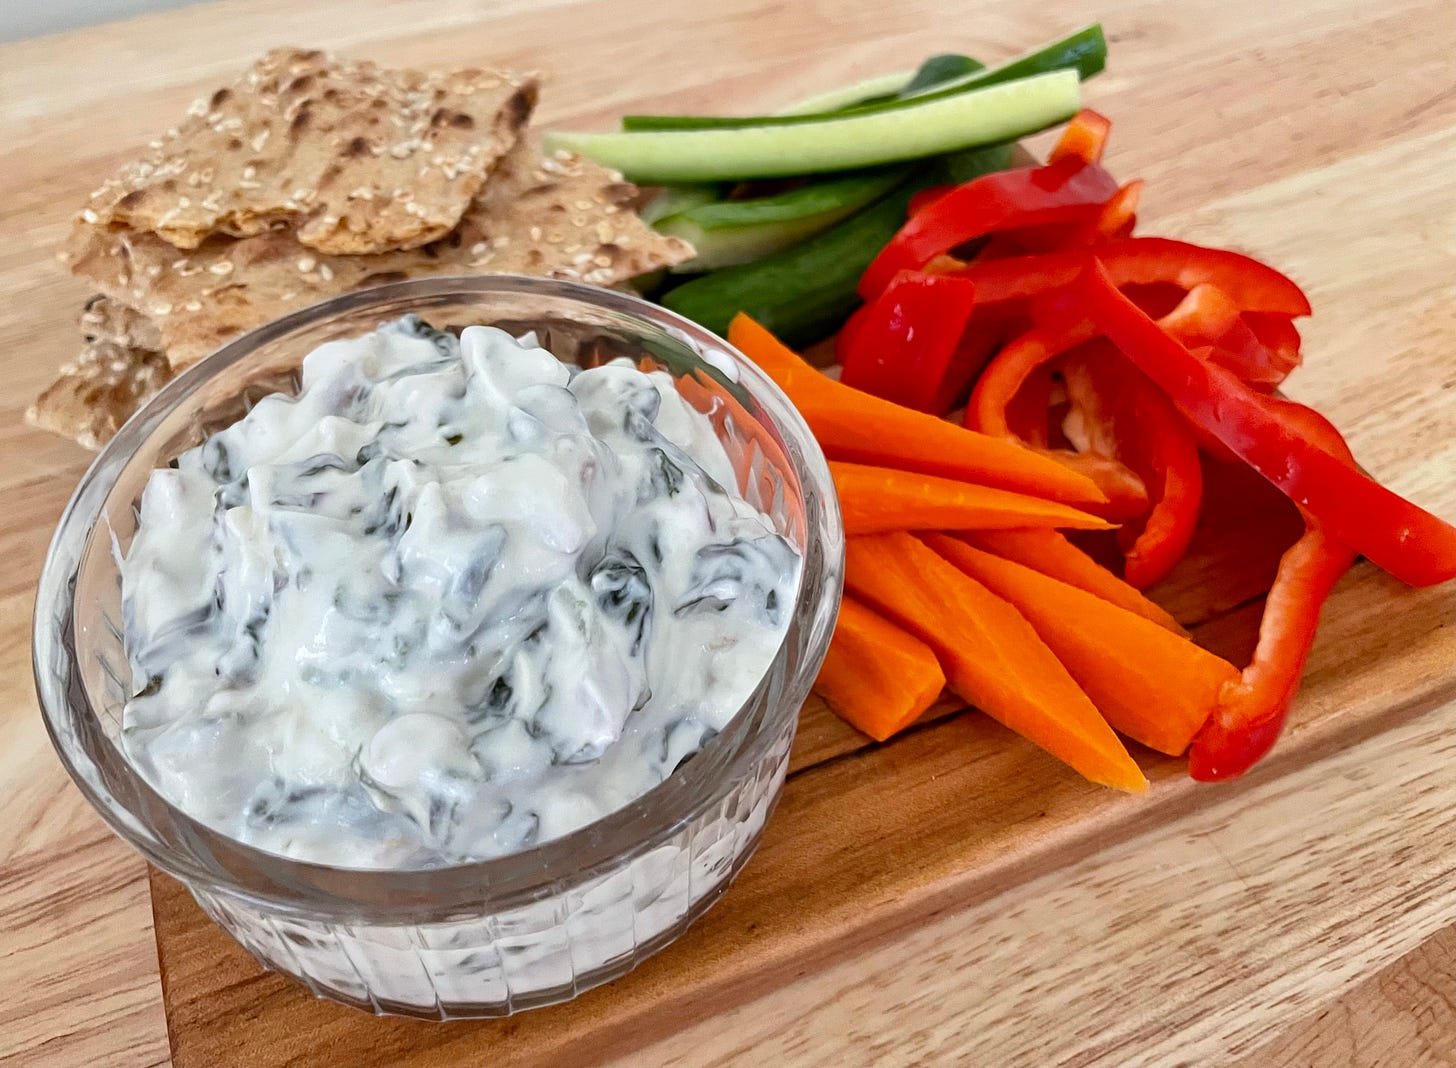 Spinach-yogurt dip served with crackers and crudites